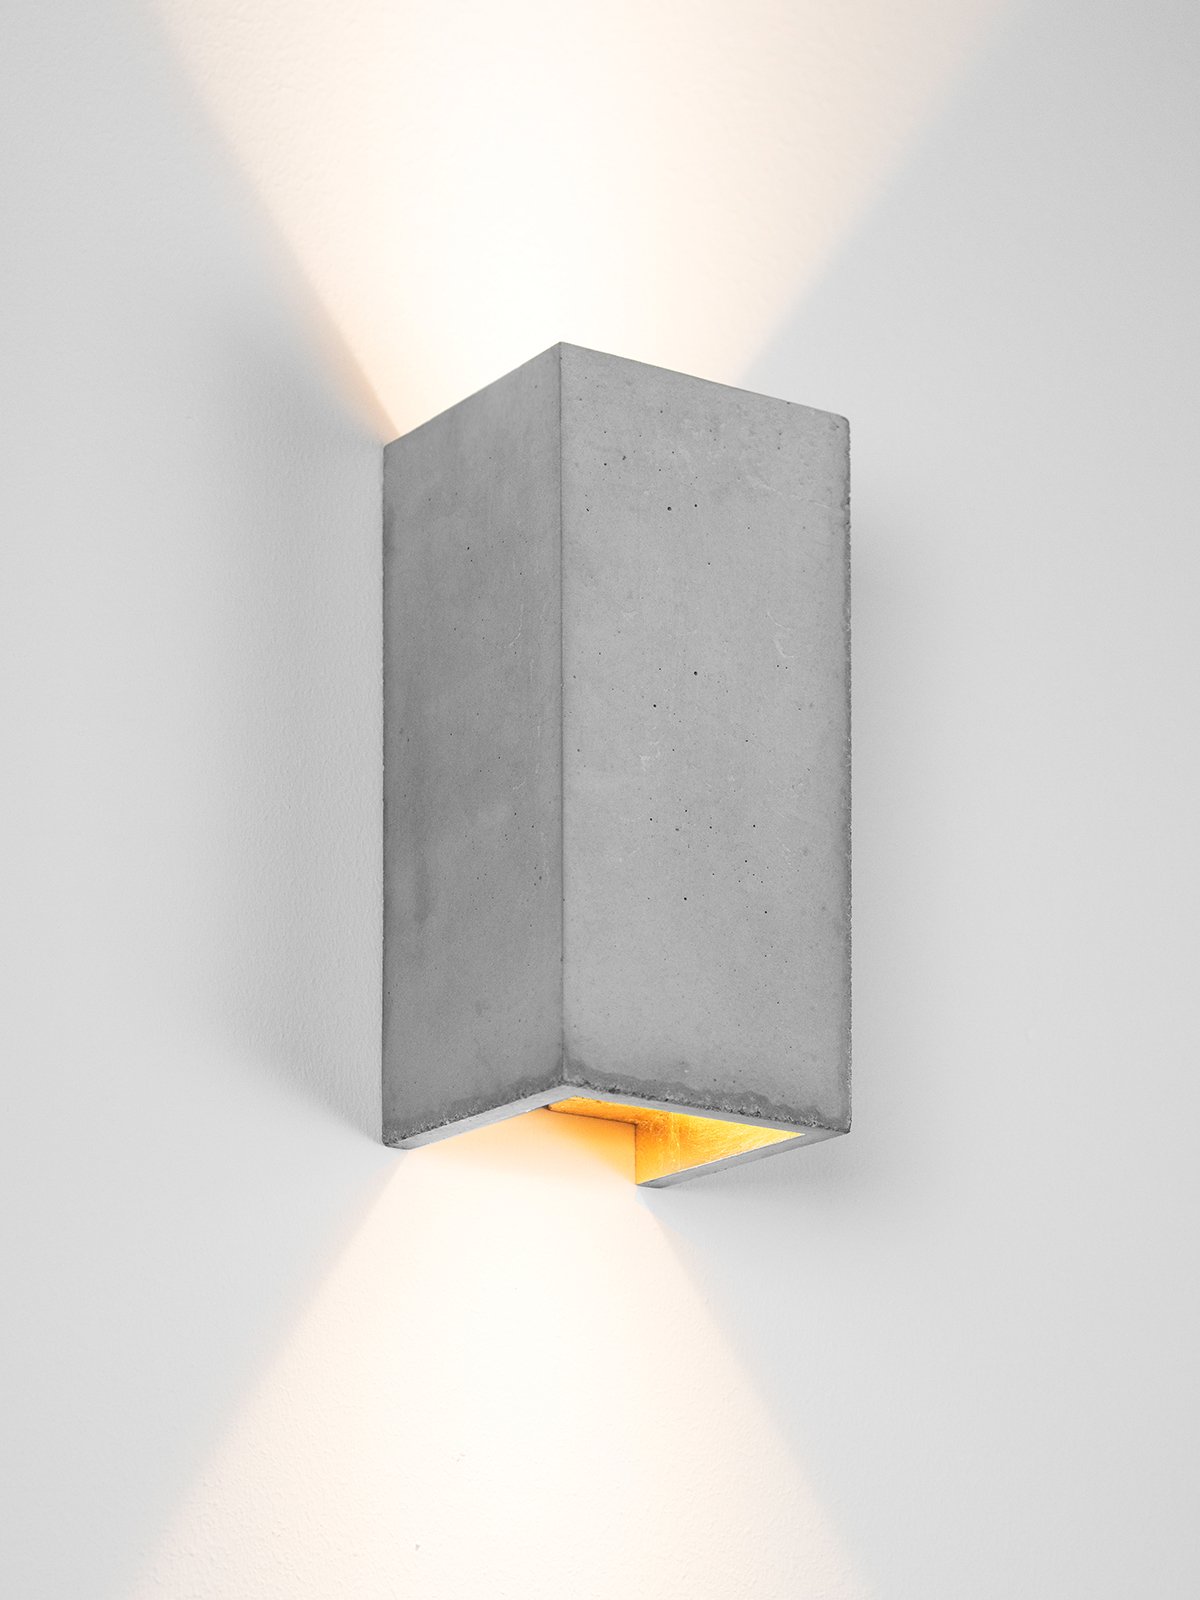 B8] Wall lamp cubic gold up and down light